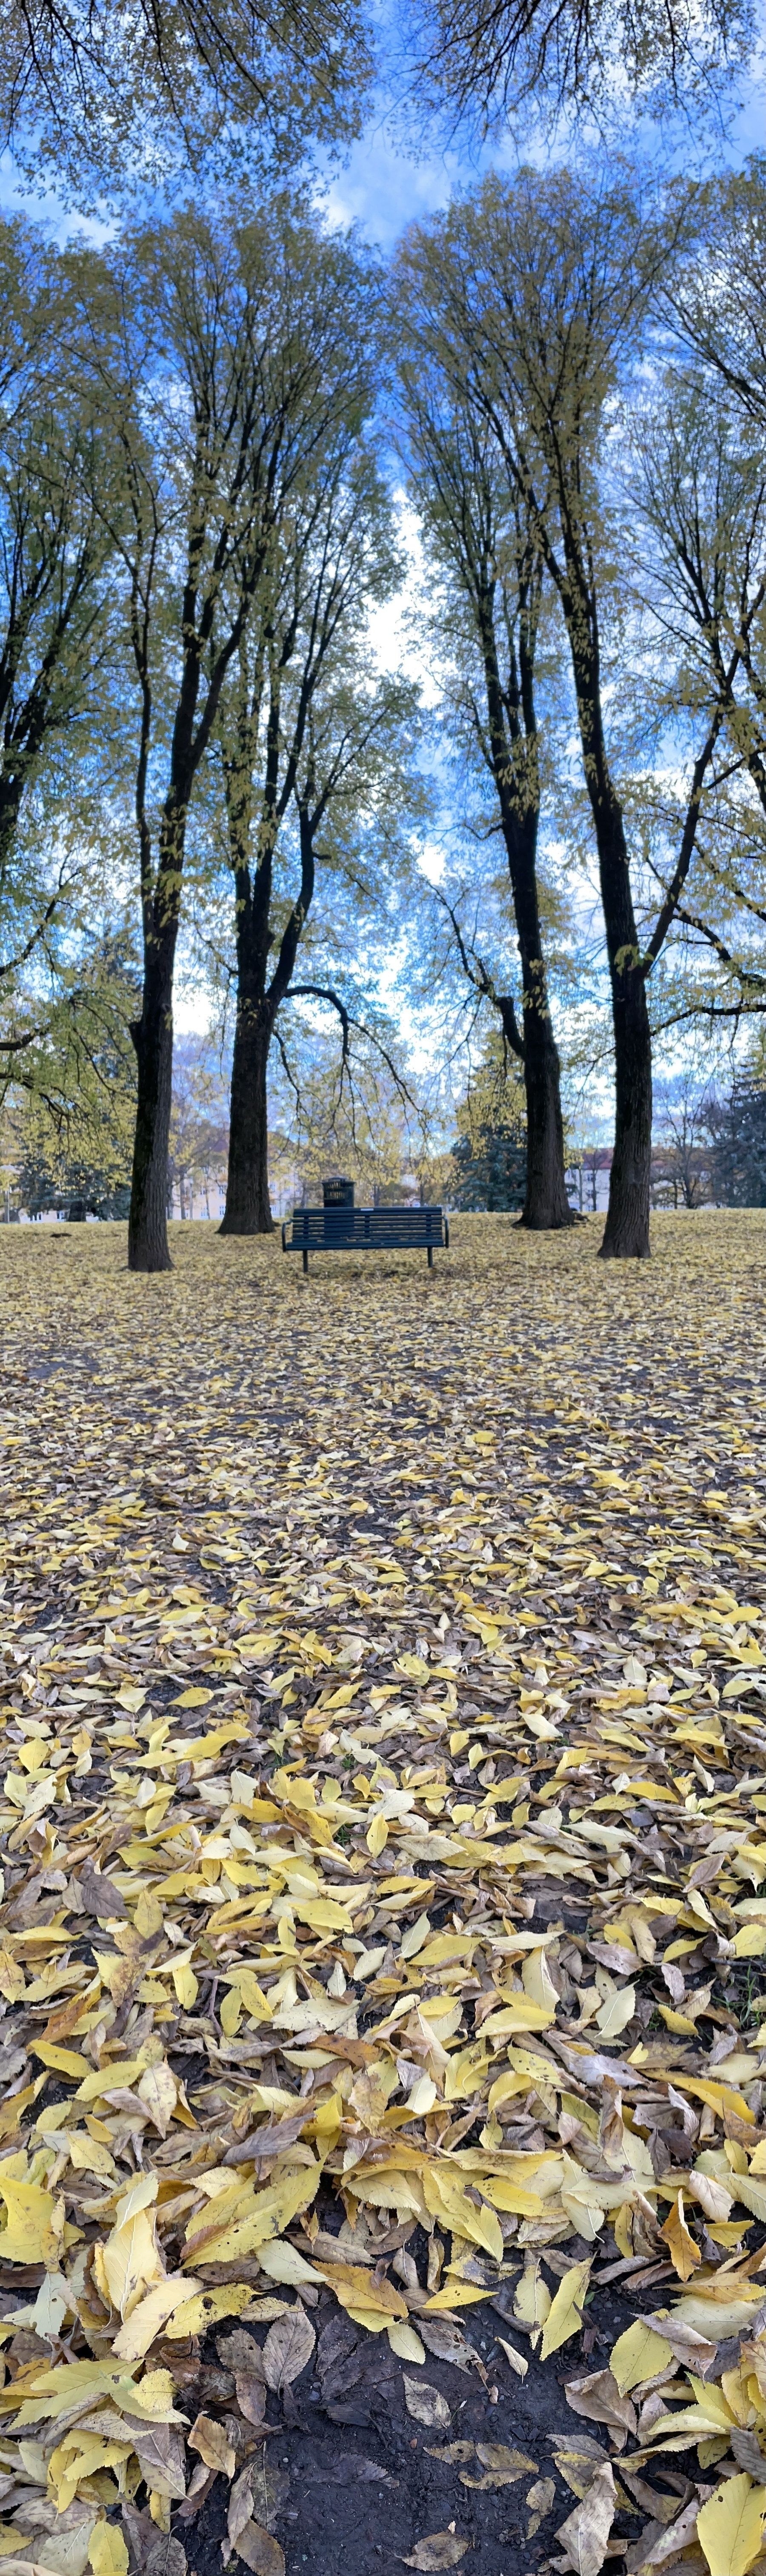 Picture of a bench in a park taken panorama style down and up